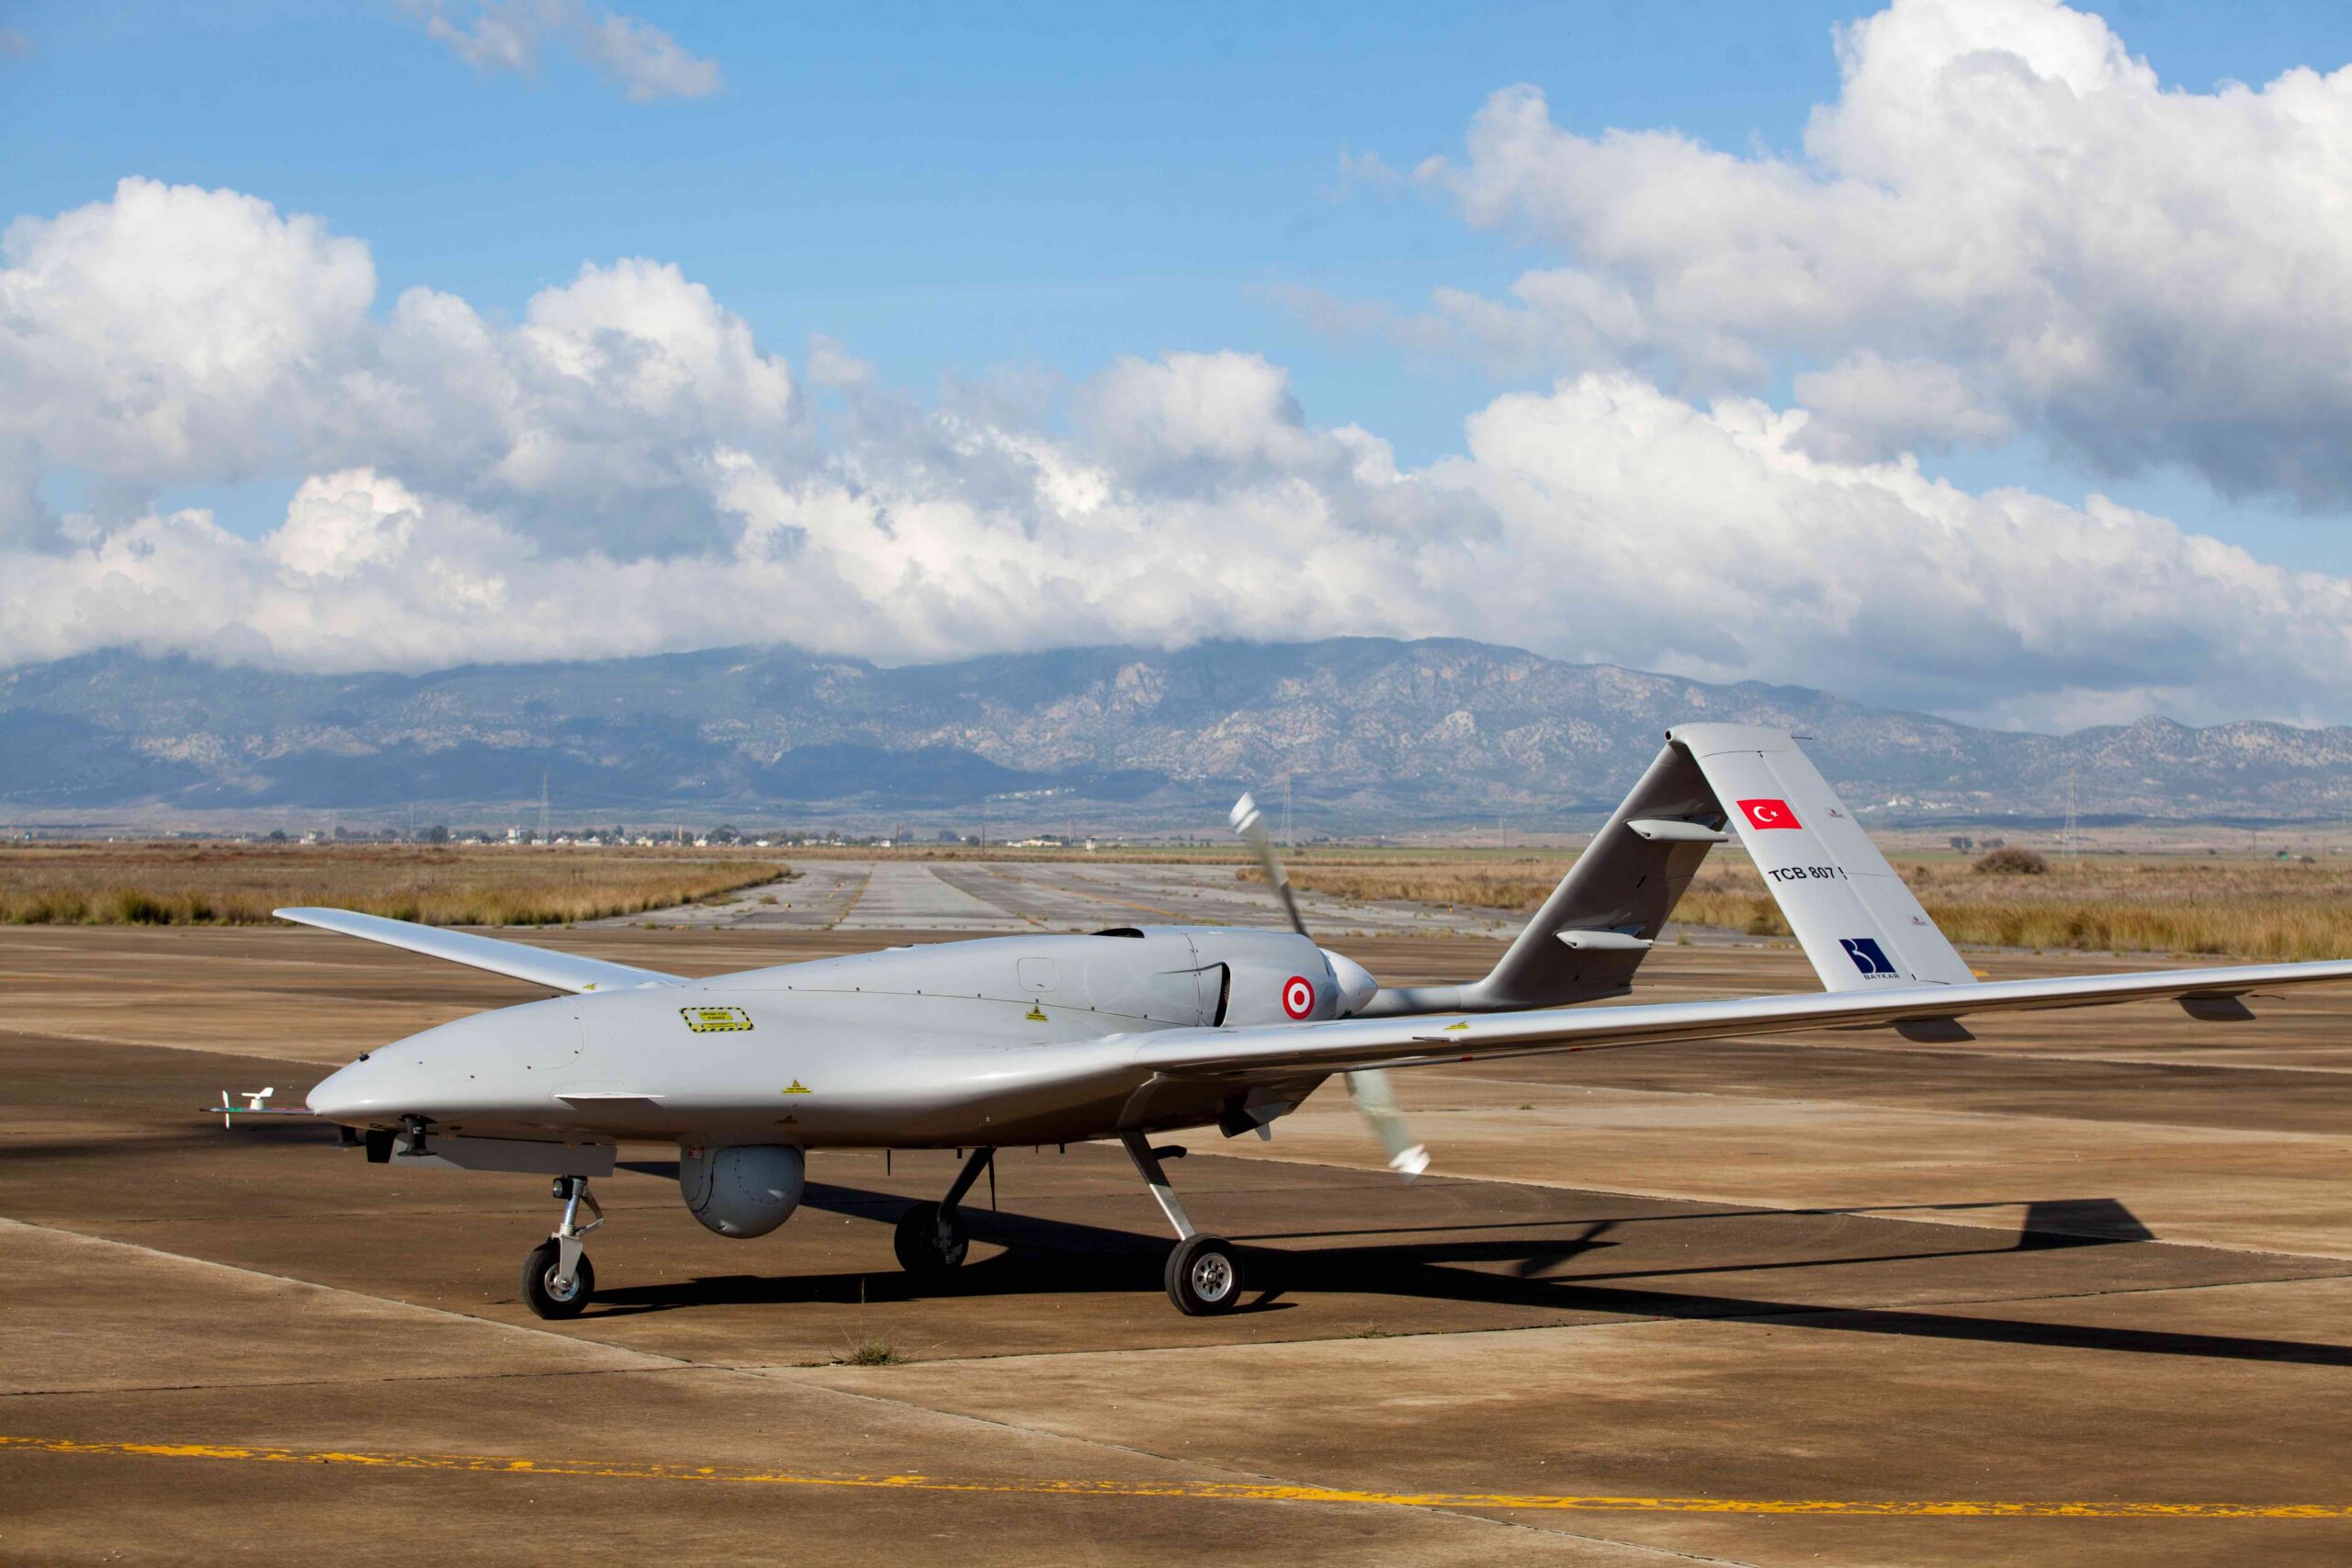 Arms embargo a major set-back for Turkey’s drone capability - former Canadian attaché